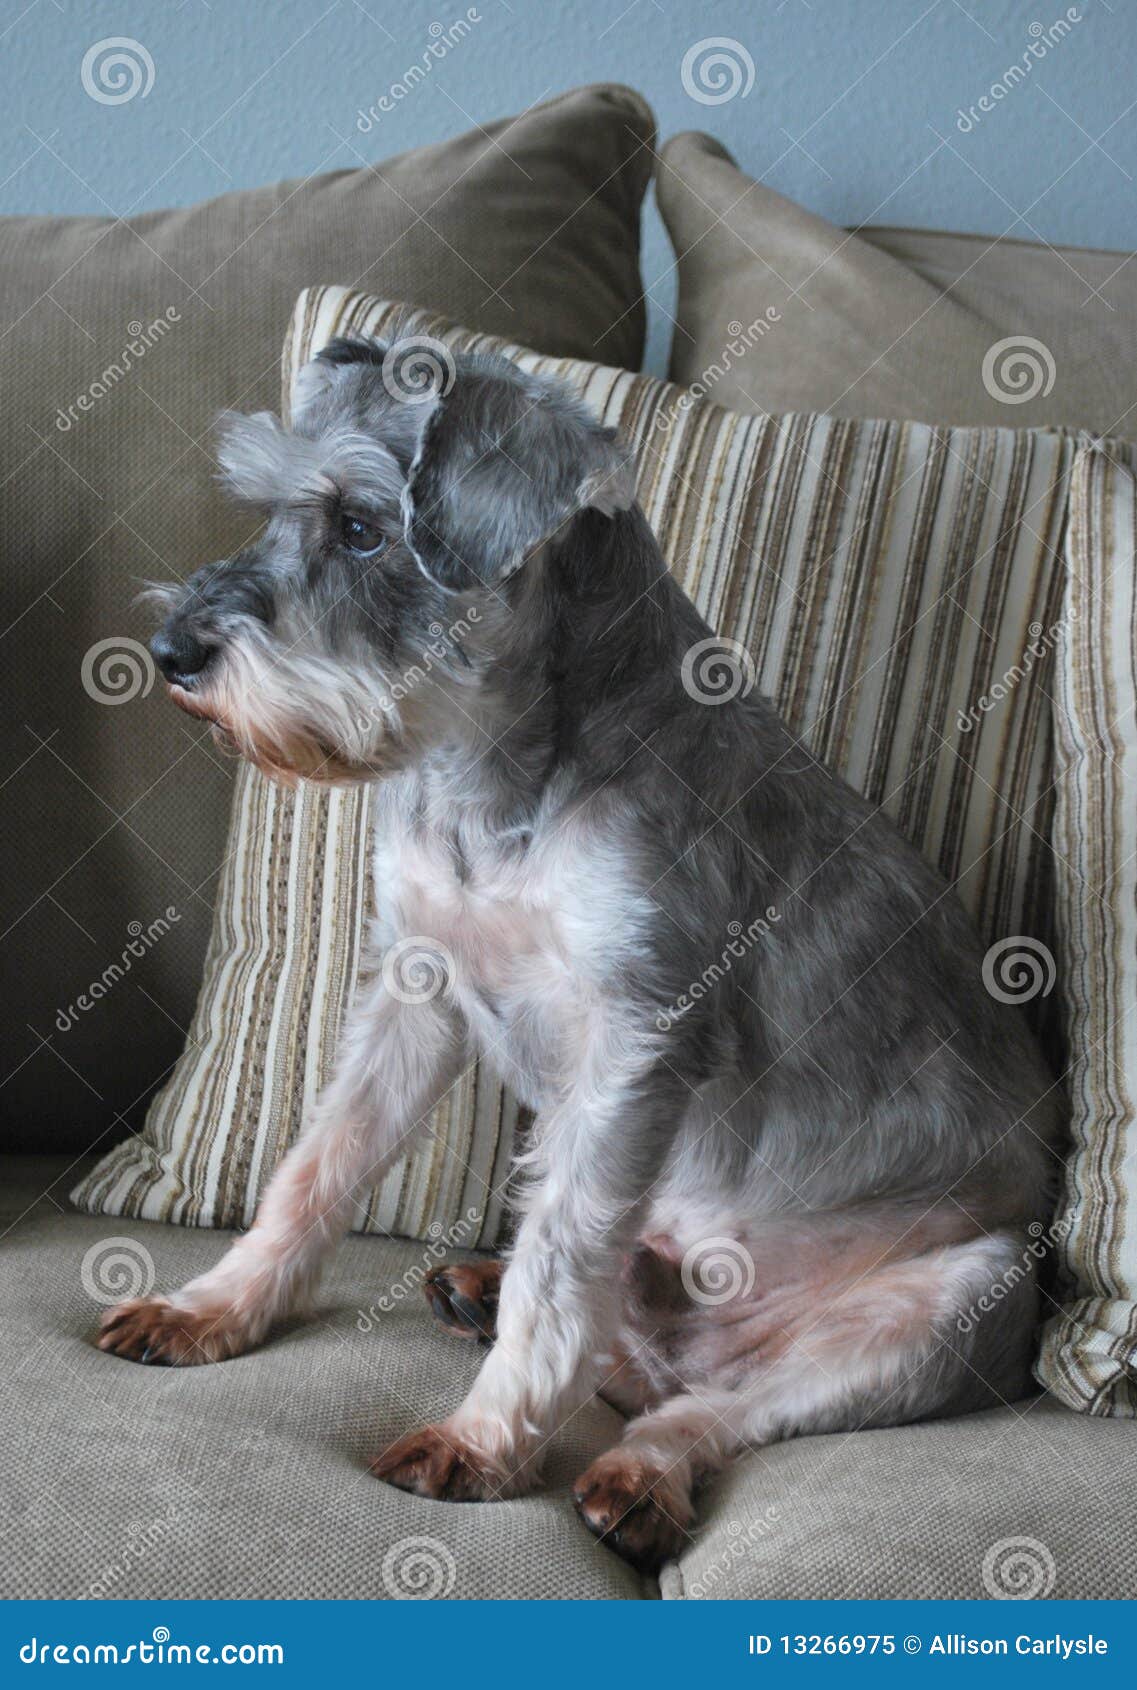 3,506 Couch Pose Sitting Stock Photos